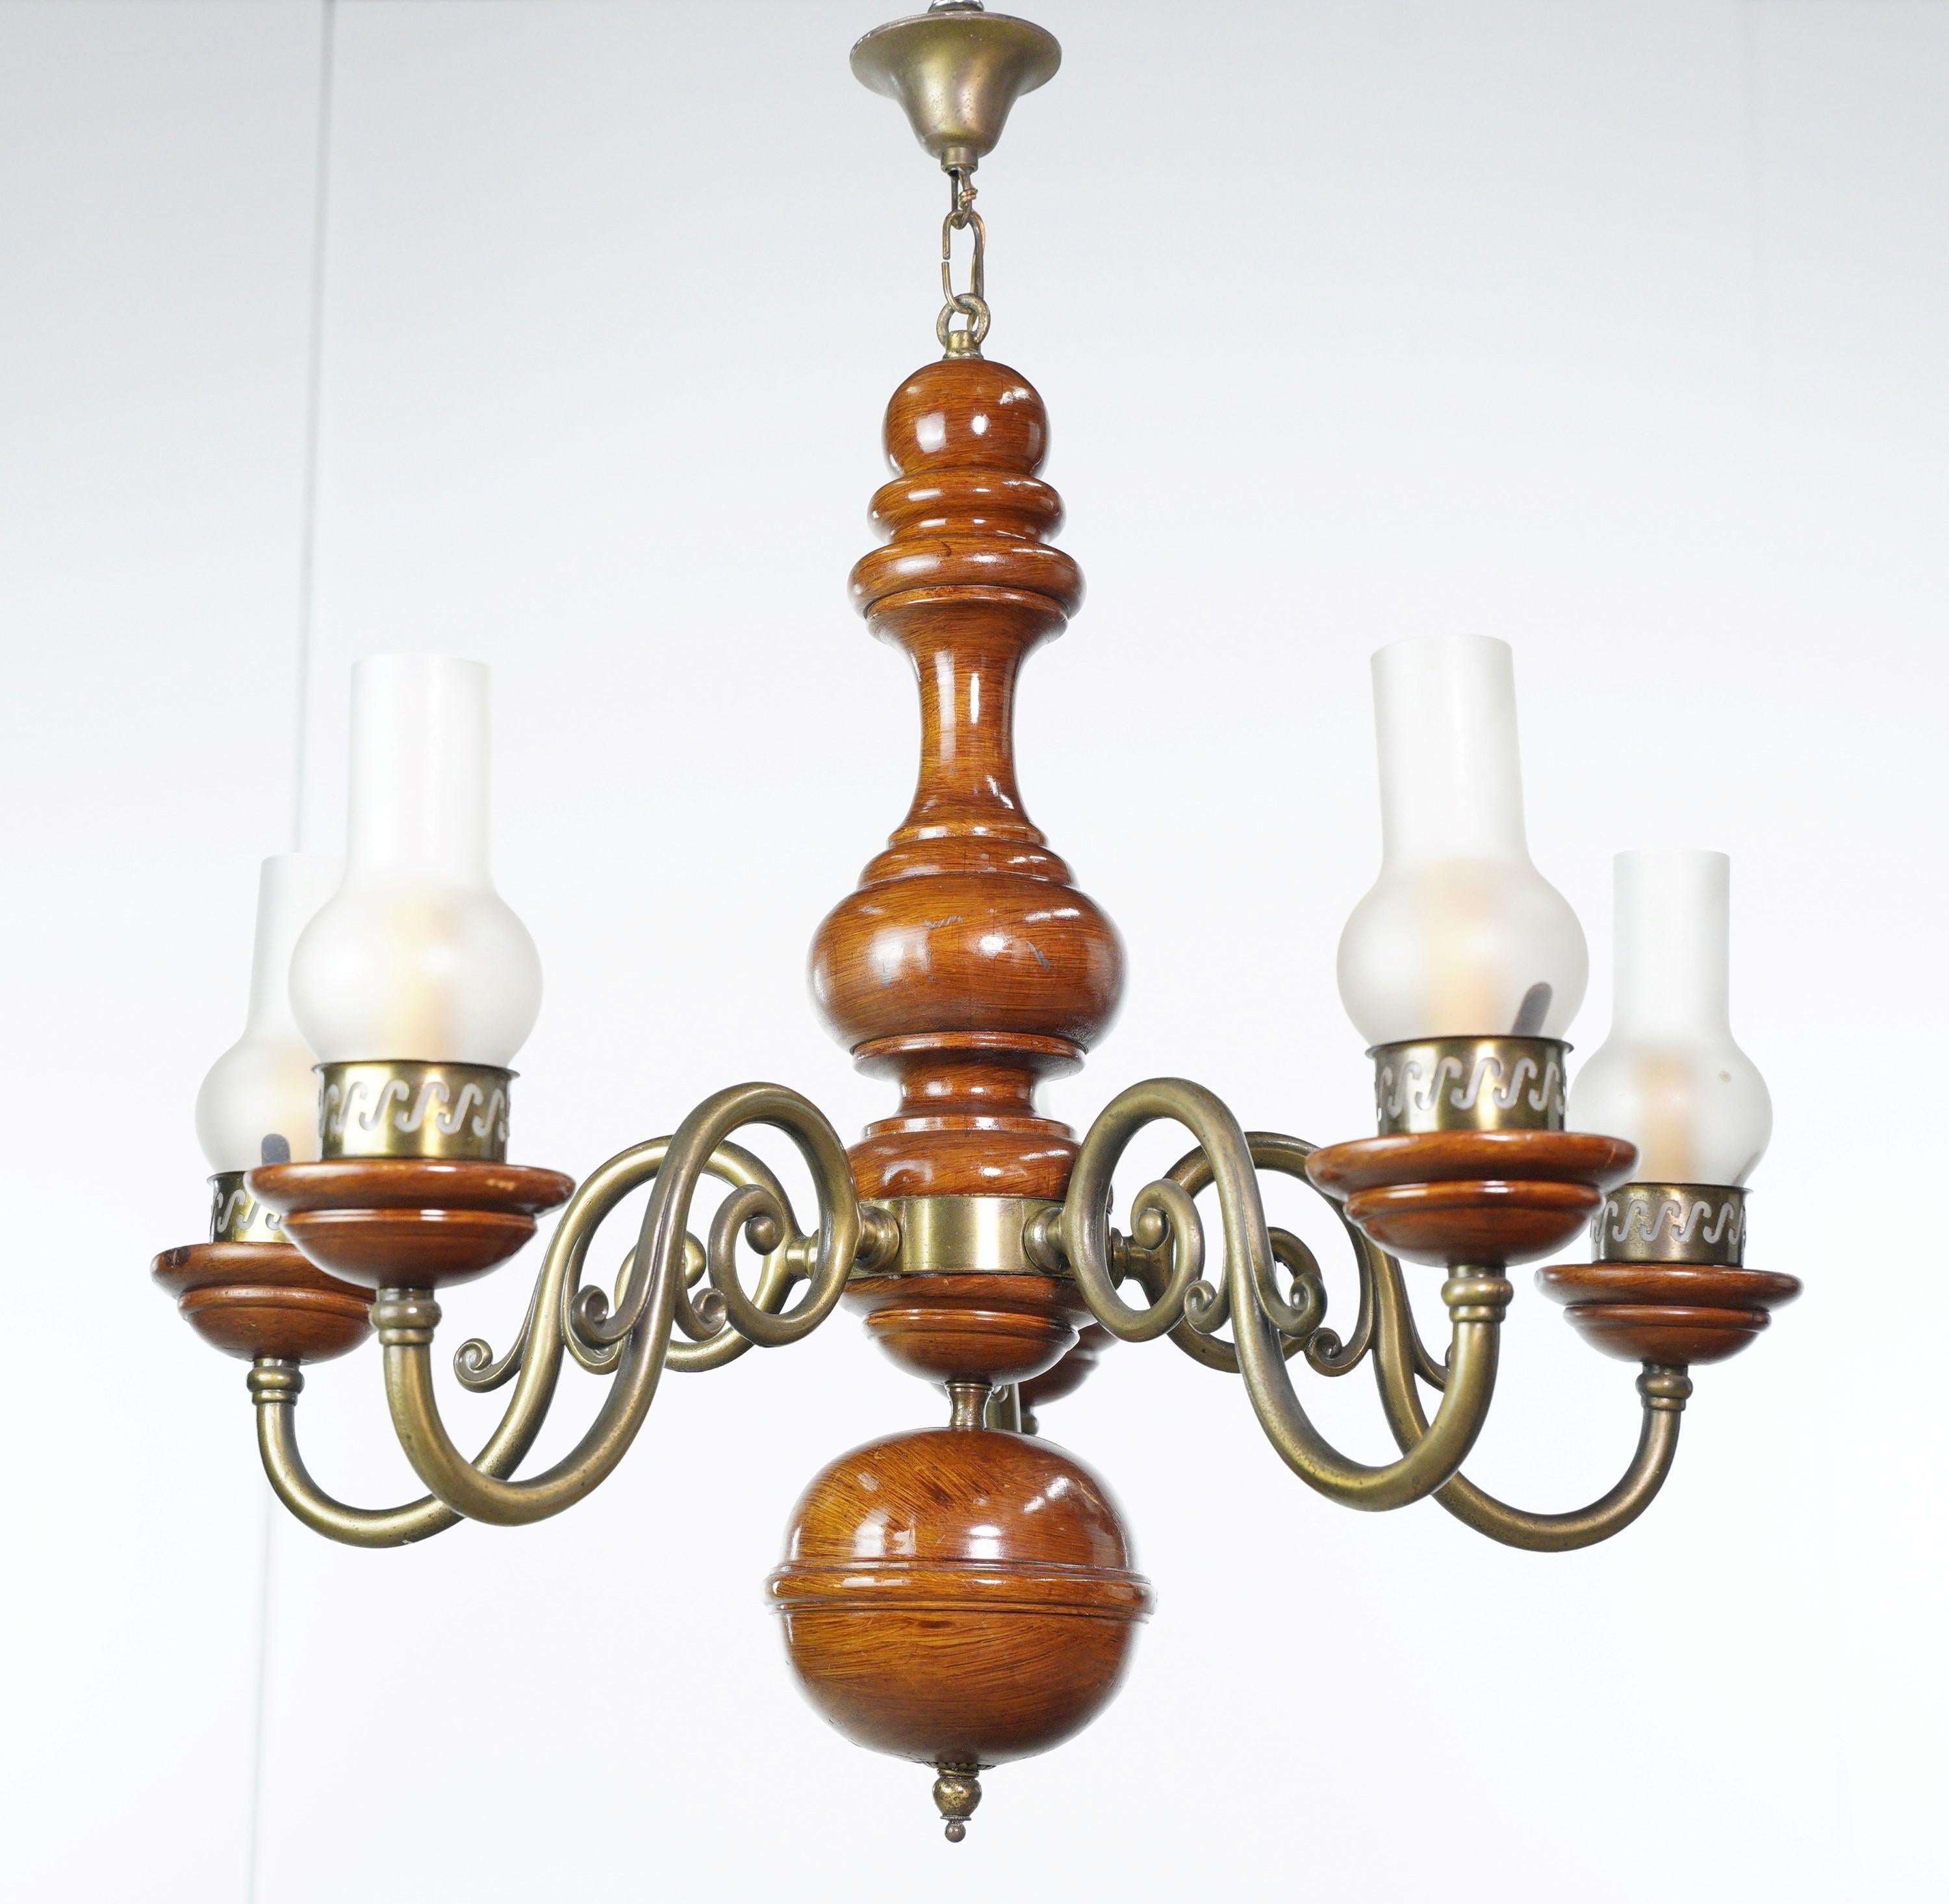 This Traditional five arm wooden chandelier is a classic lighting piece, blending the warmth of medium-tone wood with the timeless elegance of brass-plated arms with hurricane glass shades, creating a charming focal point in any traditional setting.